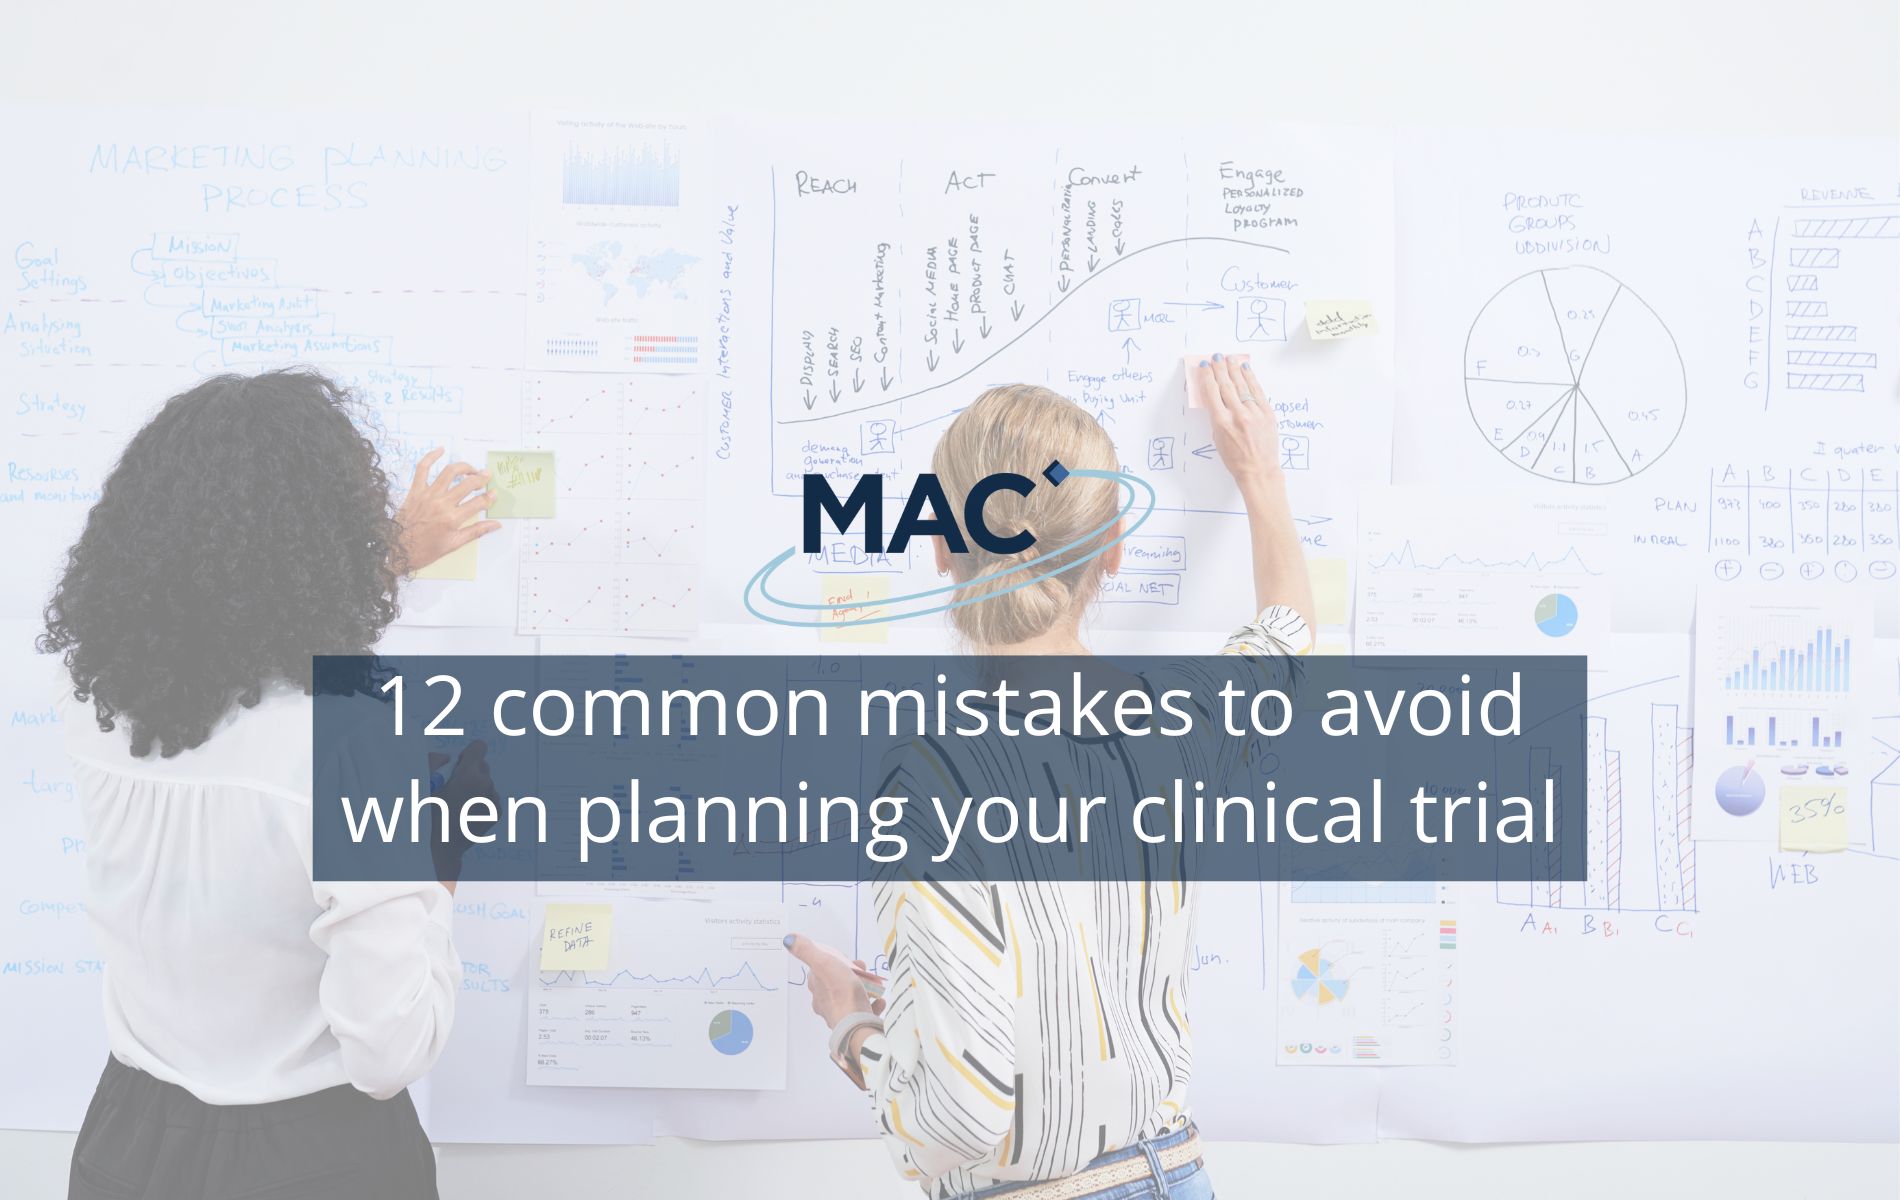 12 common mistakes to avoid when planning your clinical trial